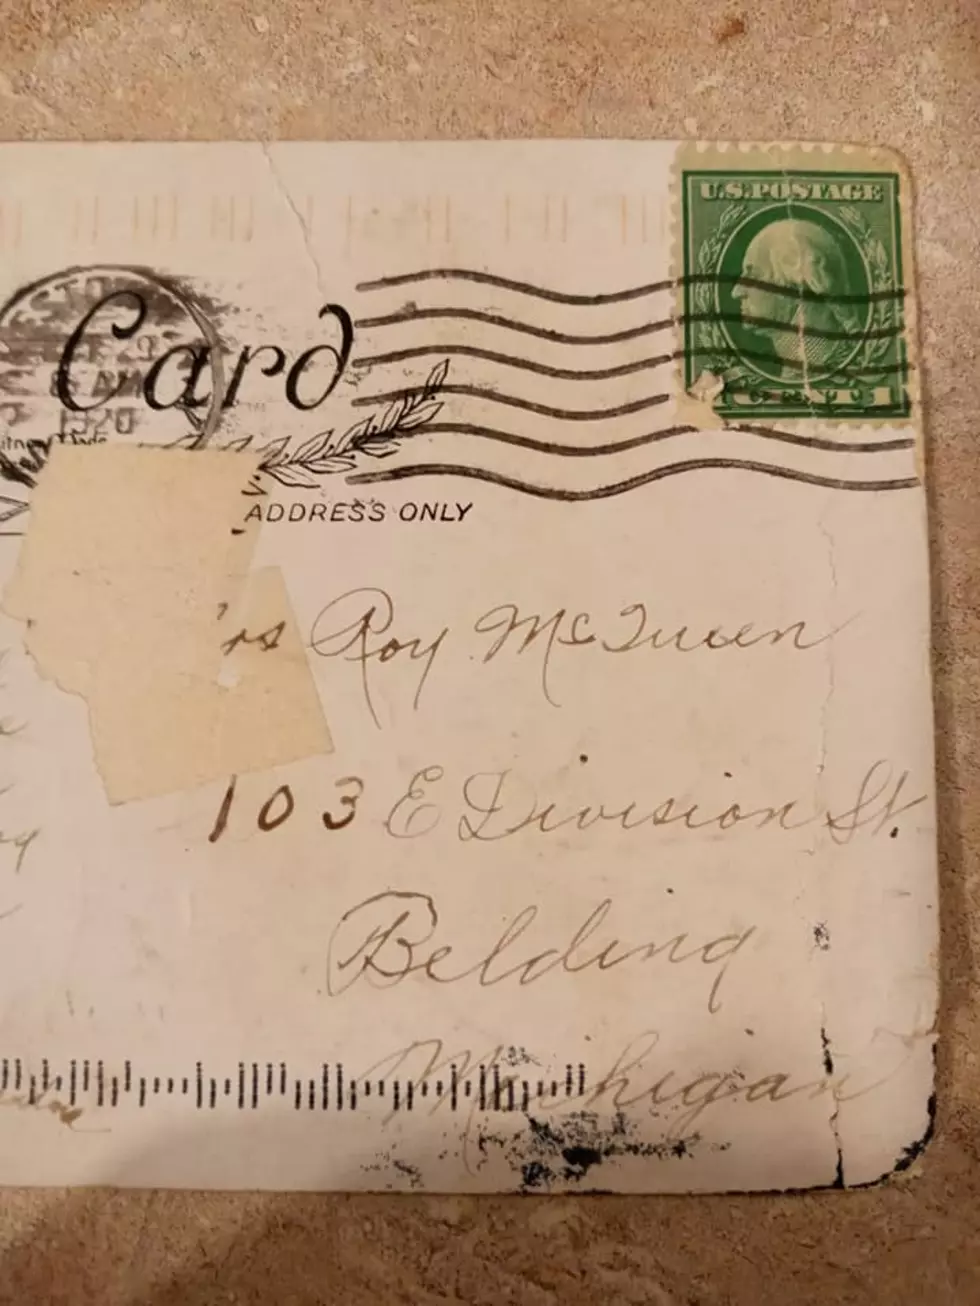 Great Scott: Michigan Woman Delivered 100 Year Old Postcard